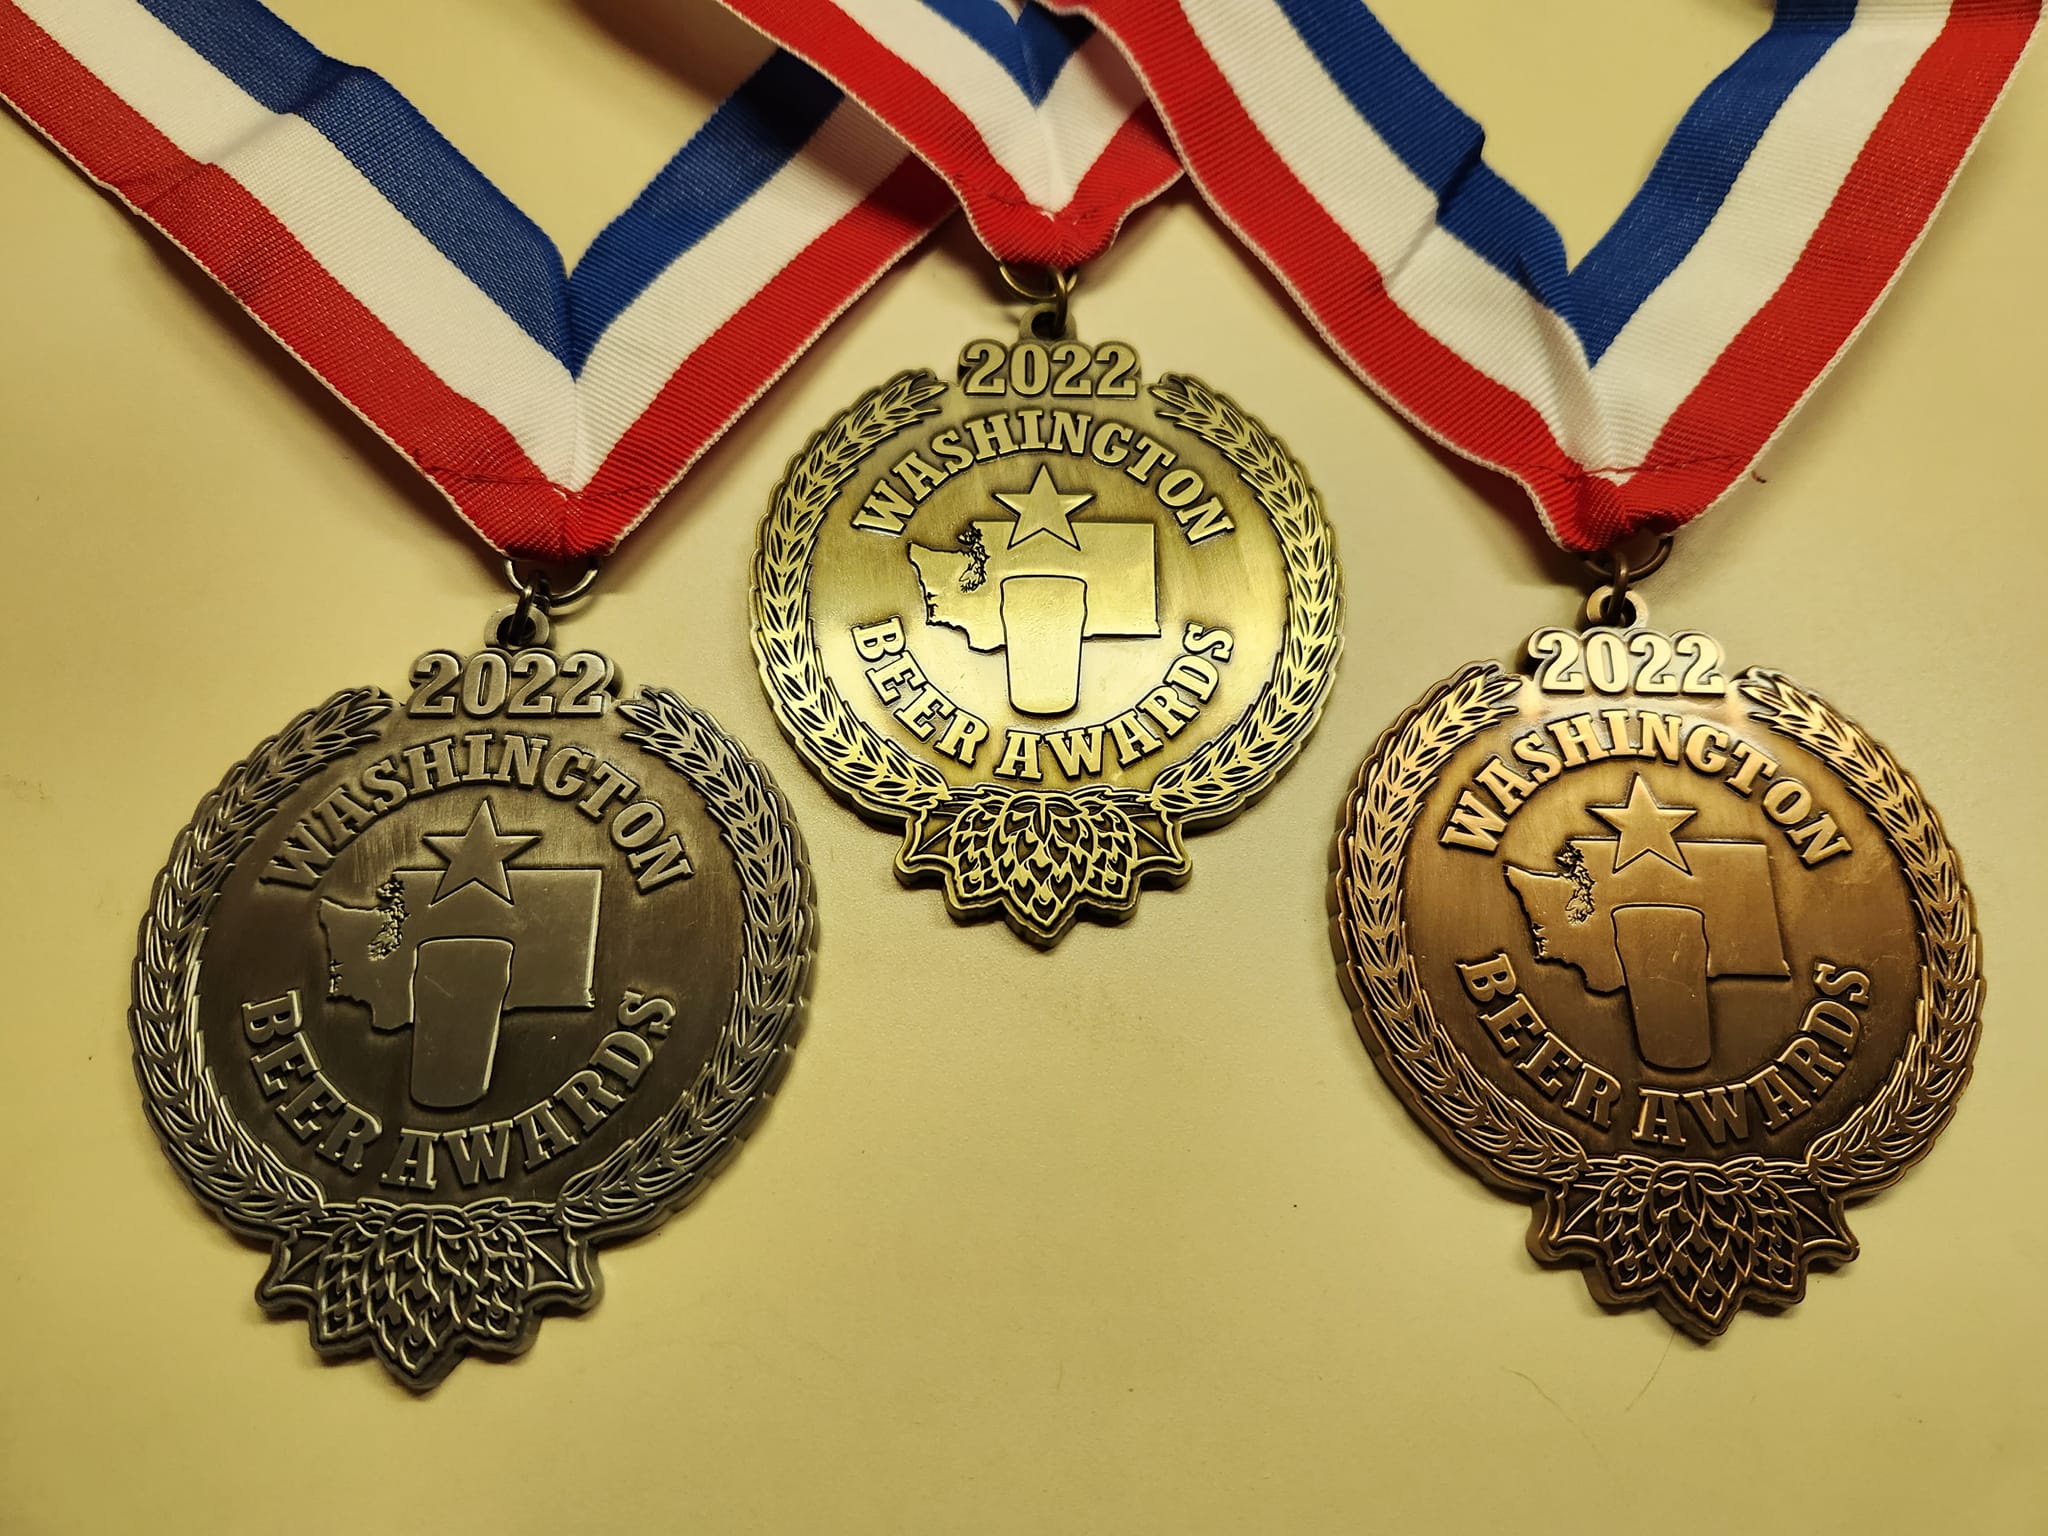 image of 2022 medals courtesy of the Washington Beer Awards